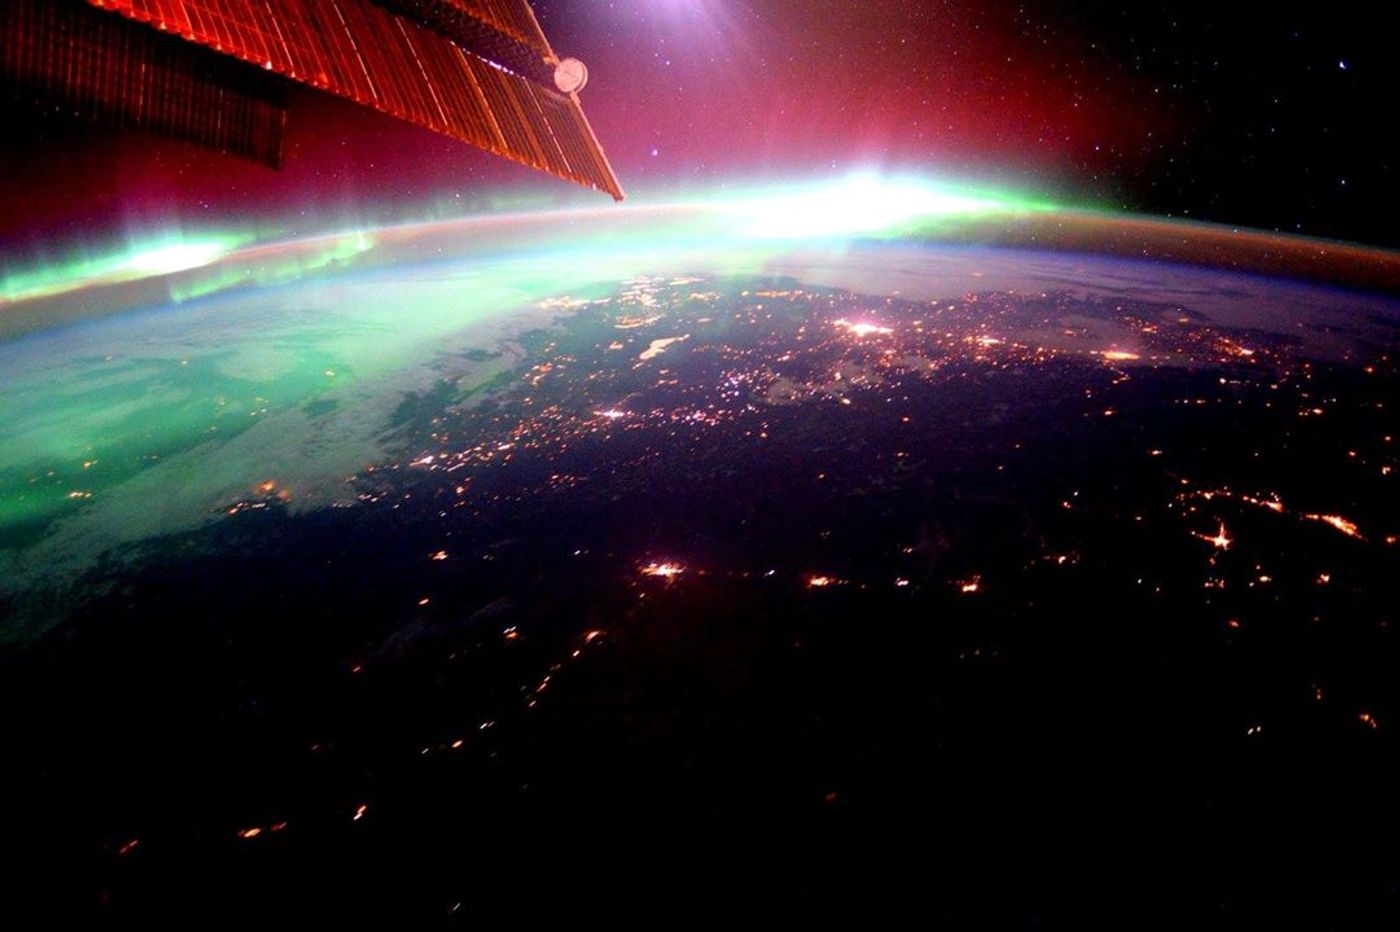 Geomagnetic storms as seen from the International Space Station.